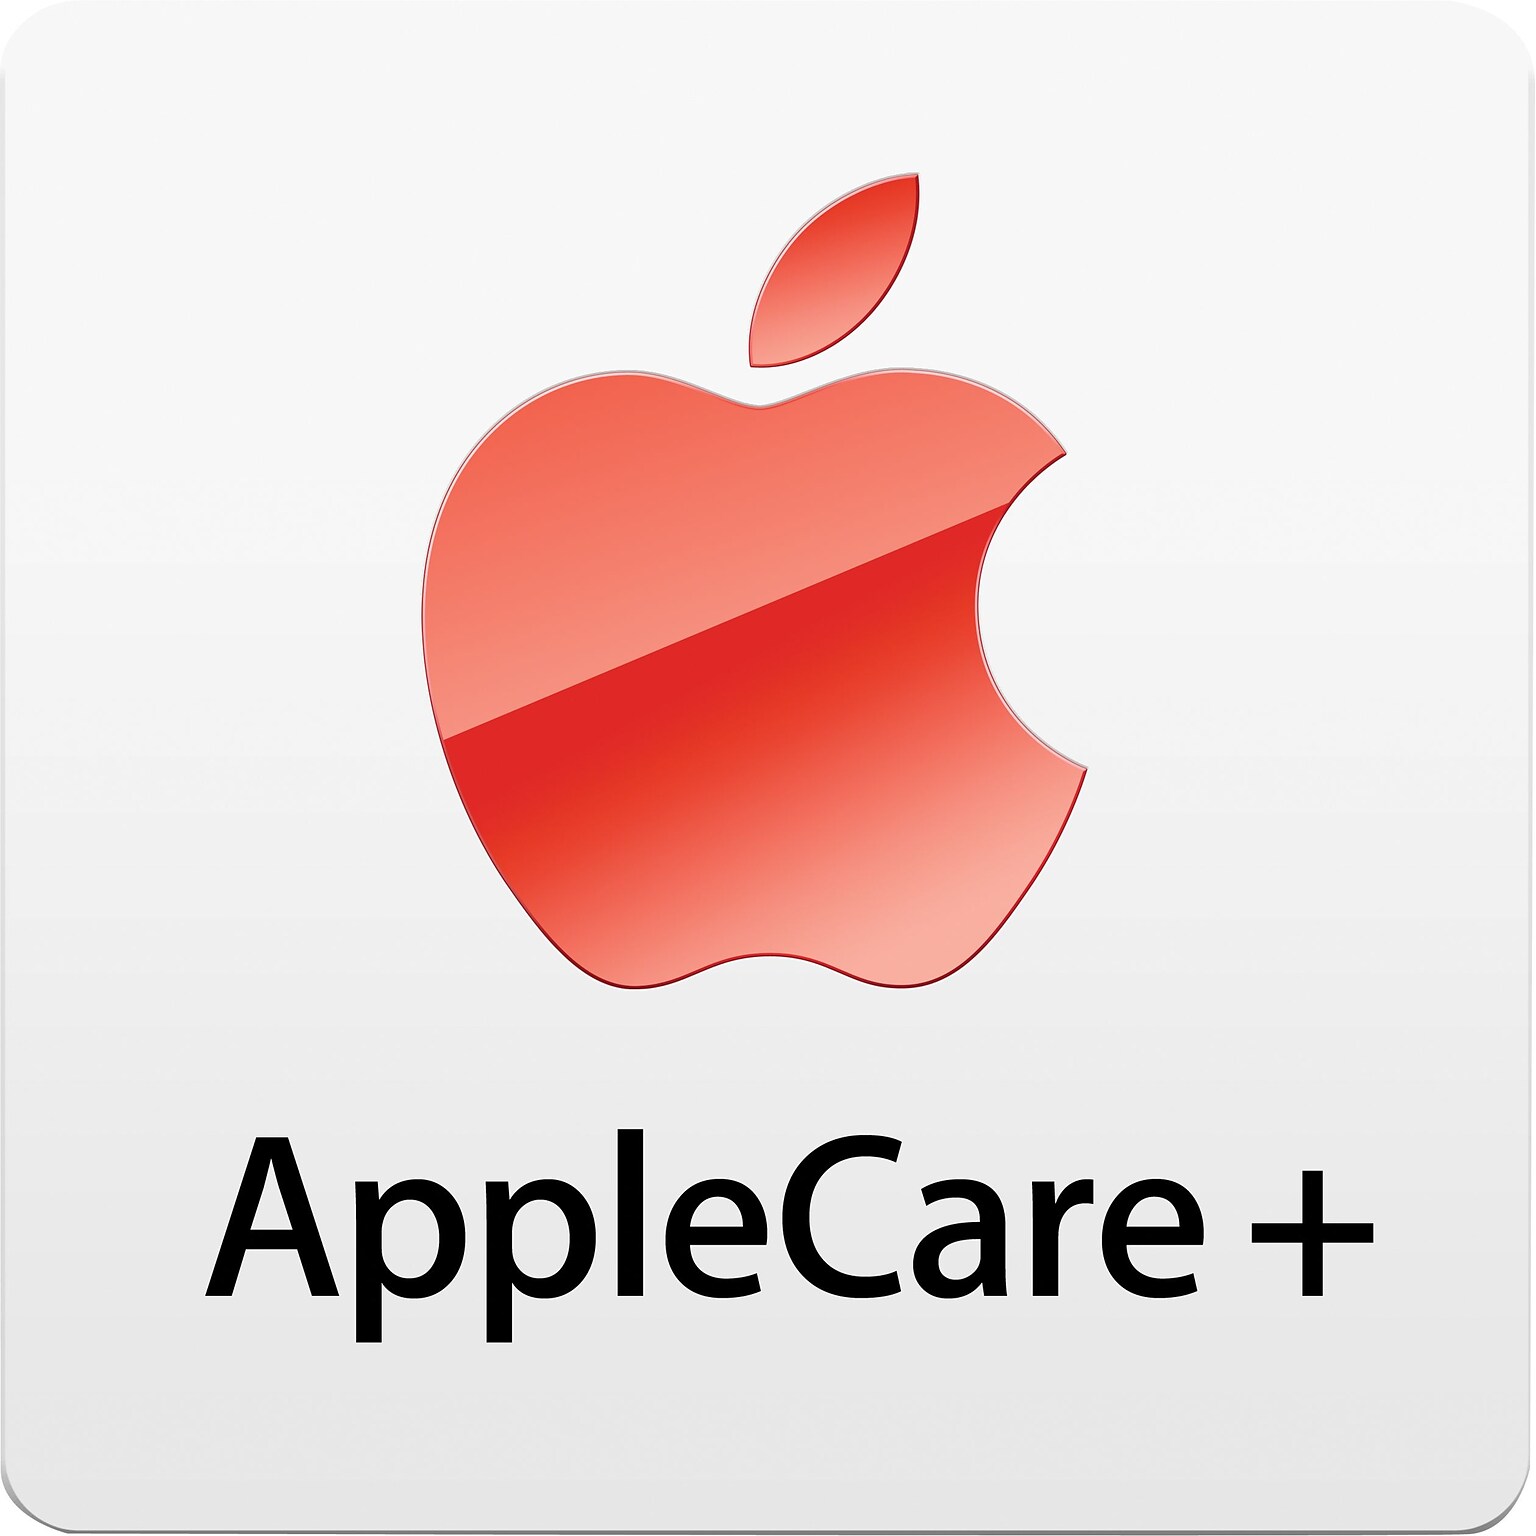 AppleCare+ 2-year Protection Plan for iPad with Retina Display, Wi-Fi 128GB, White